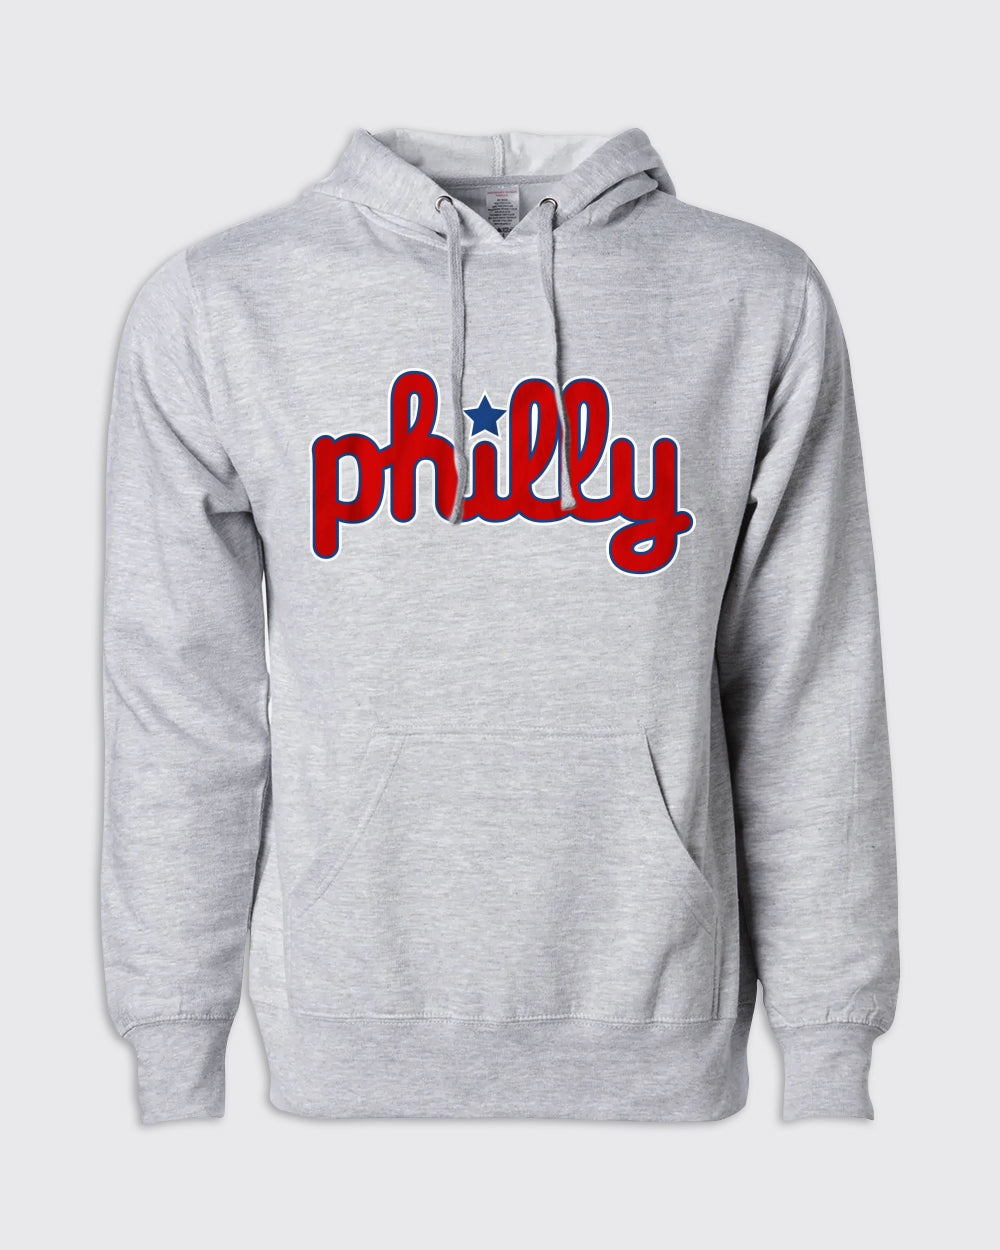 Philly Legendary Script Hoodie - Hoodies, Phillies - Philly Sports Shirts